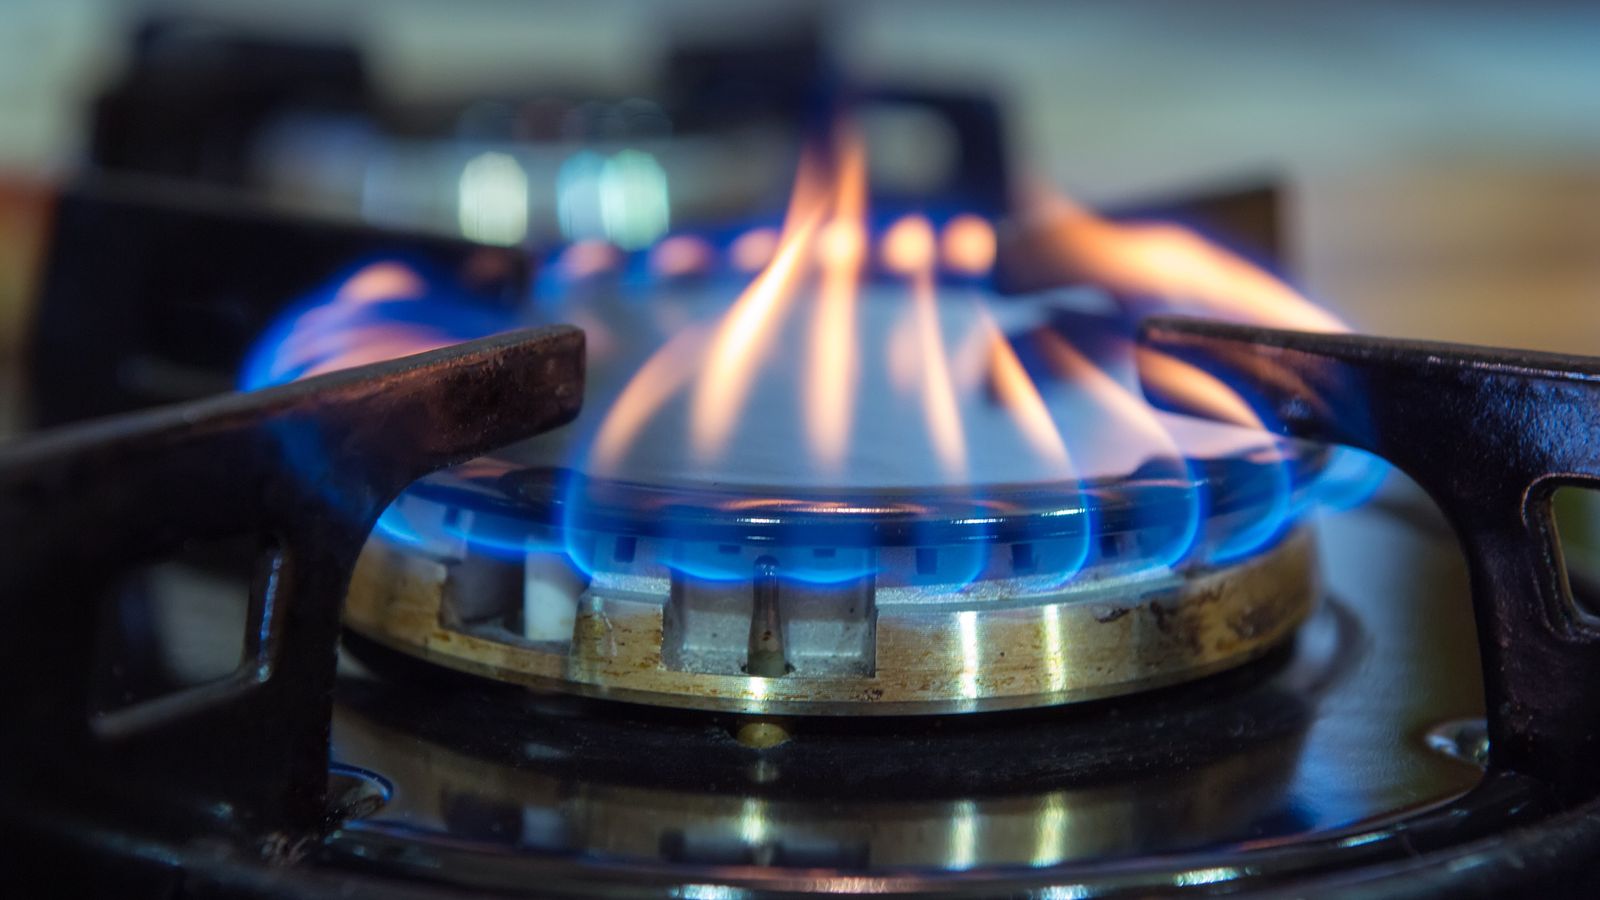 Energy bills may rise by £17 a year to prevent suppliers going bust